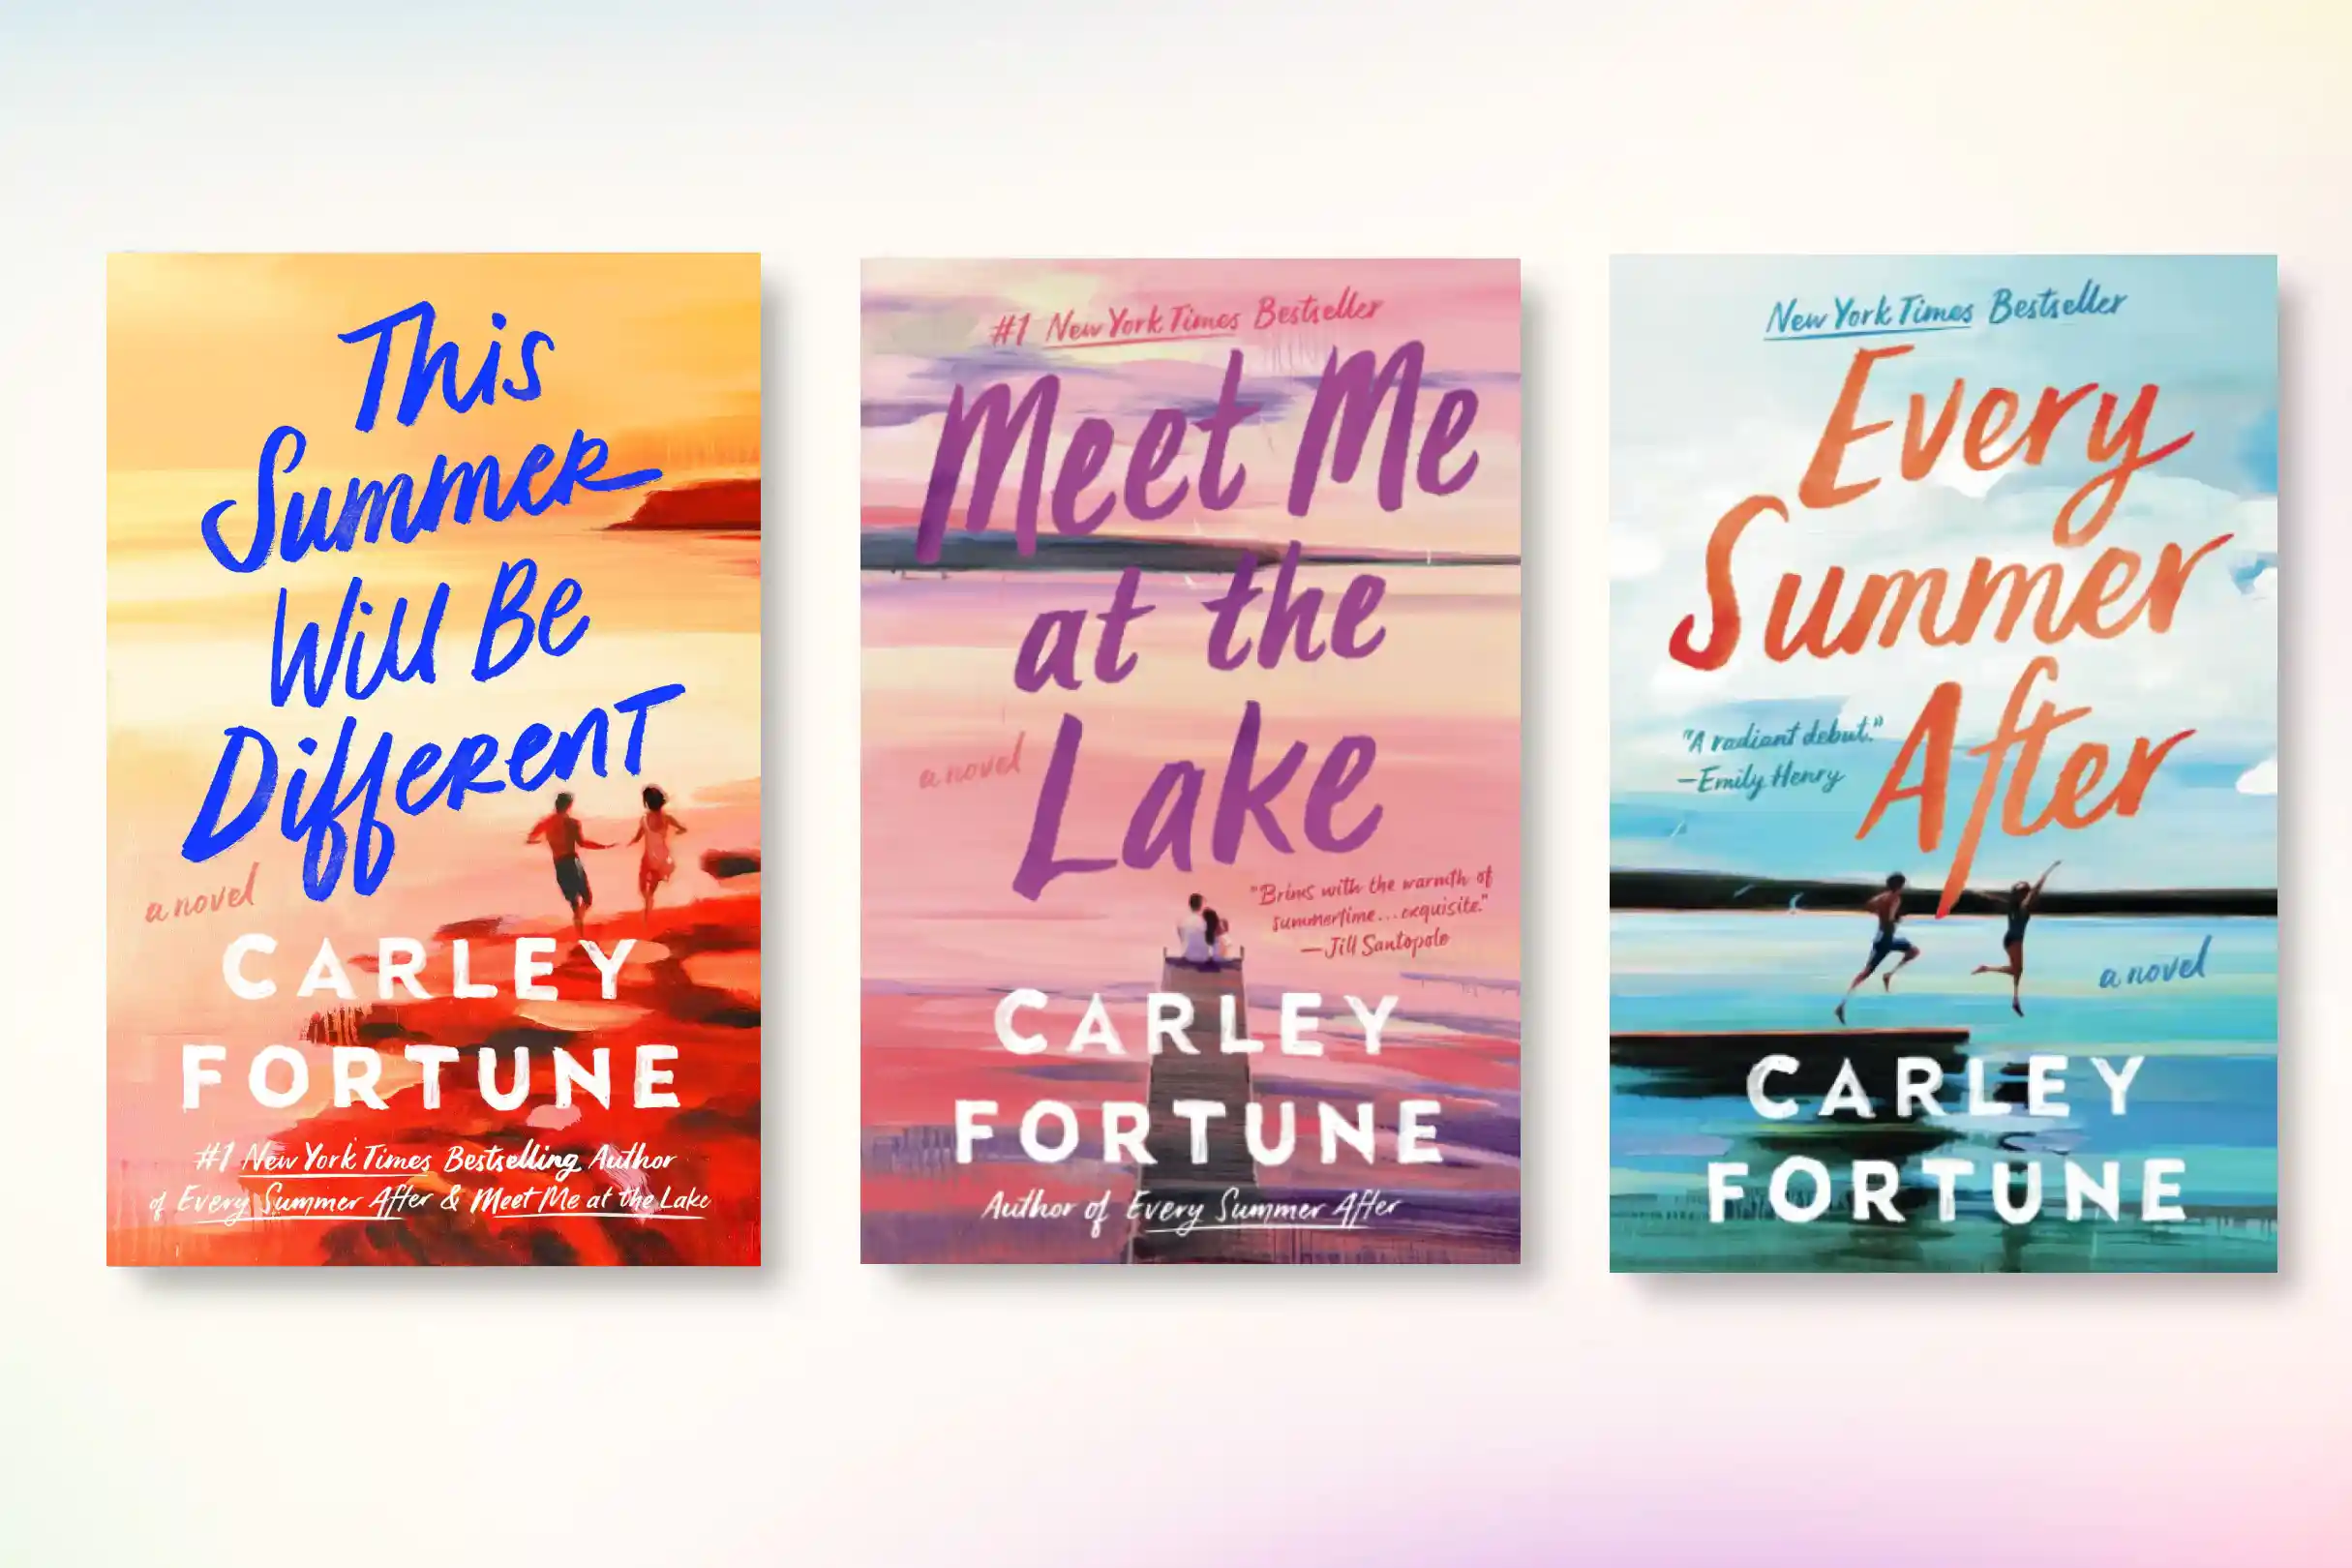 carley_fortune_books_in_order